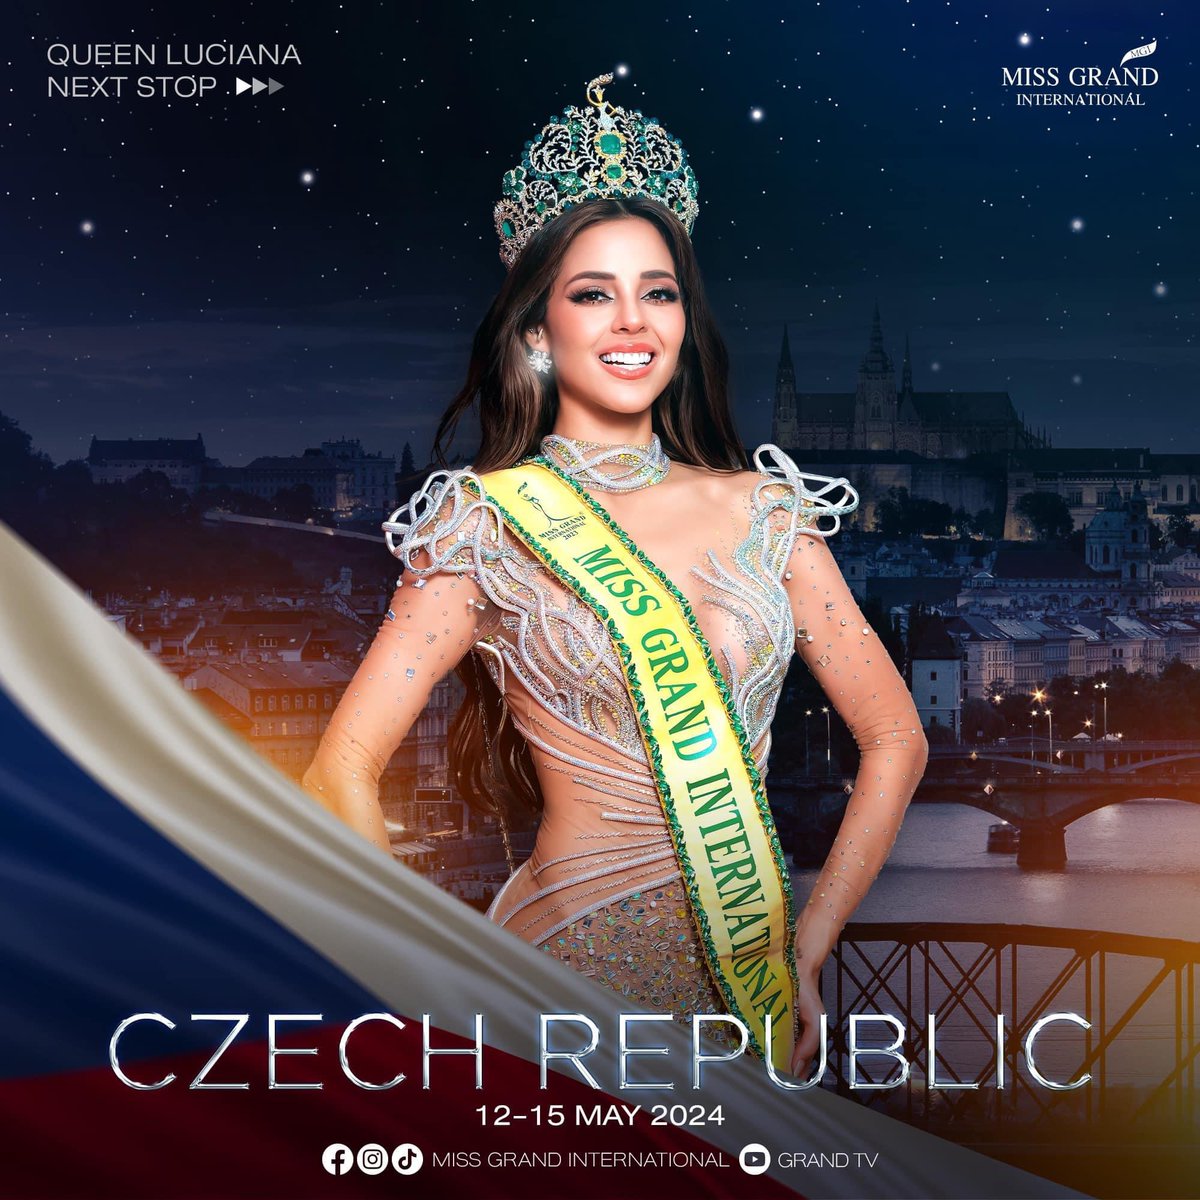 The queen never rests! 💪🏻

Get ready to join Queen Luciana‘s mission in the Czech Republic from May 12th to 15th. 🇨🇿

#MissGrandCzechRepublic 
#MissGrandCzechRepublic2024
.
#MGI2024 #MGI 
#GrandExperiences
#MissGrandInternational
#MissGrandInternational2024
#WeAreGRANDthe1andOnly